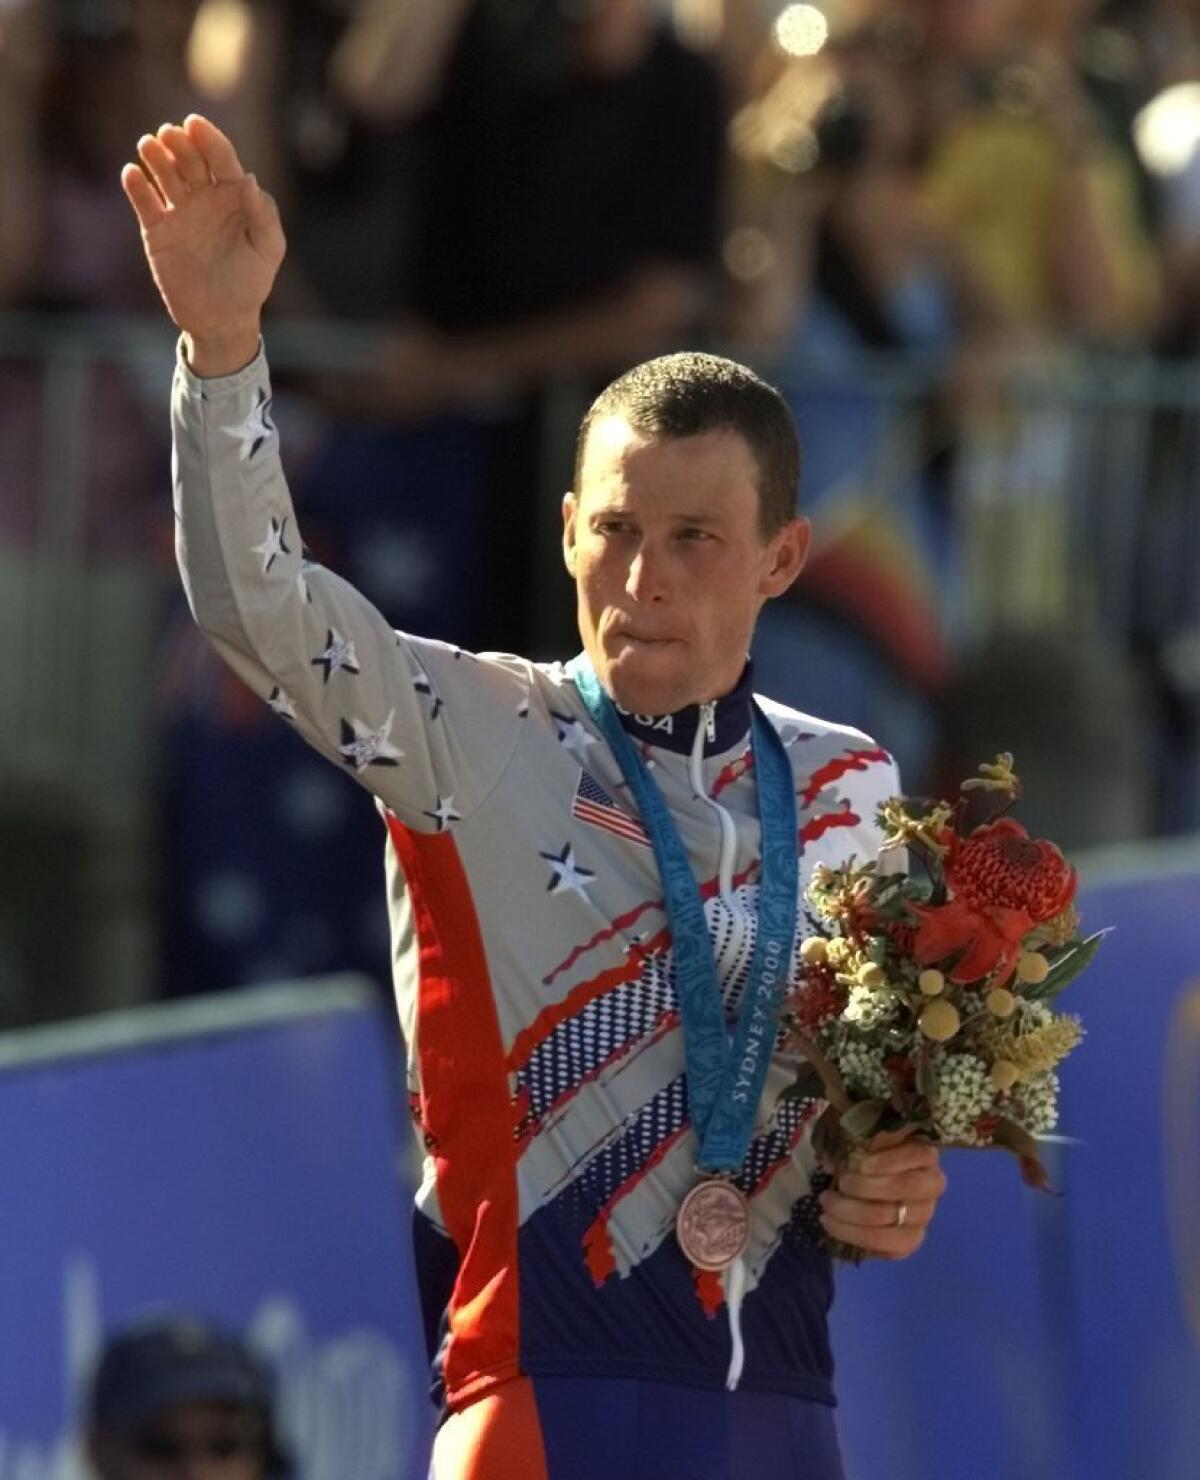 Lance Armstrong waves after receiving the bronze medal in the men's individual time trials at the 2000 Summer Olympics.